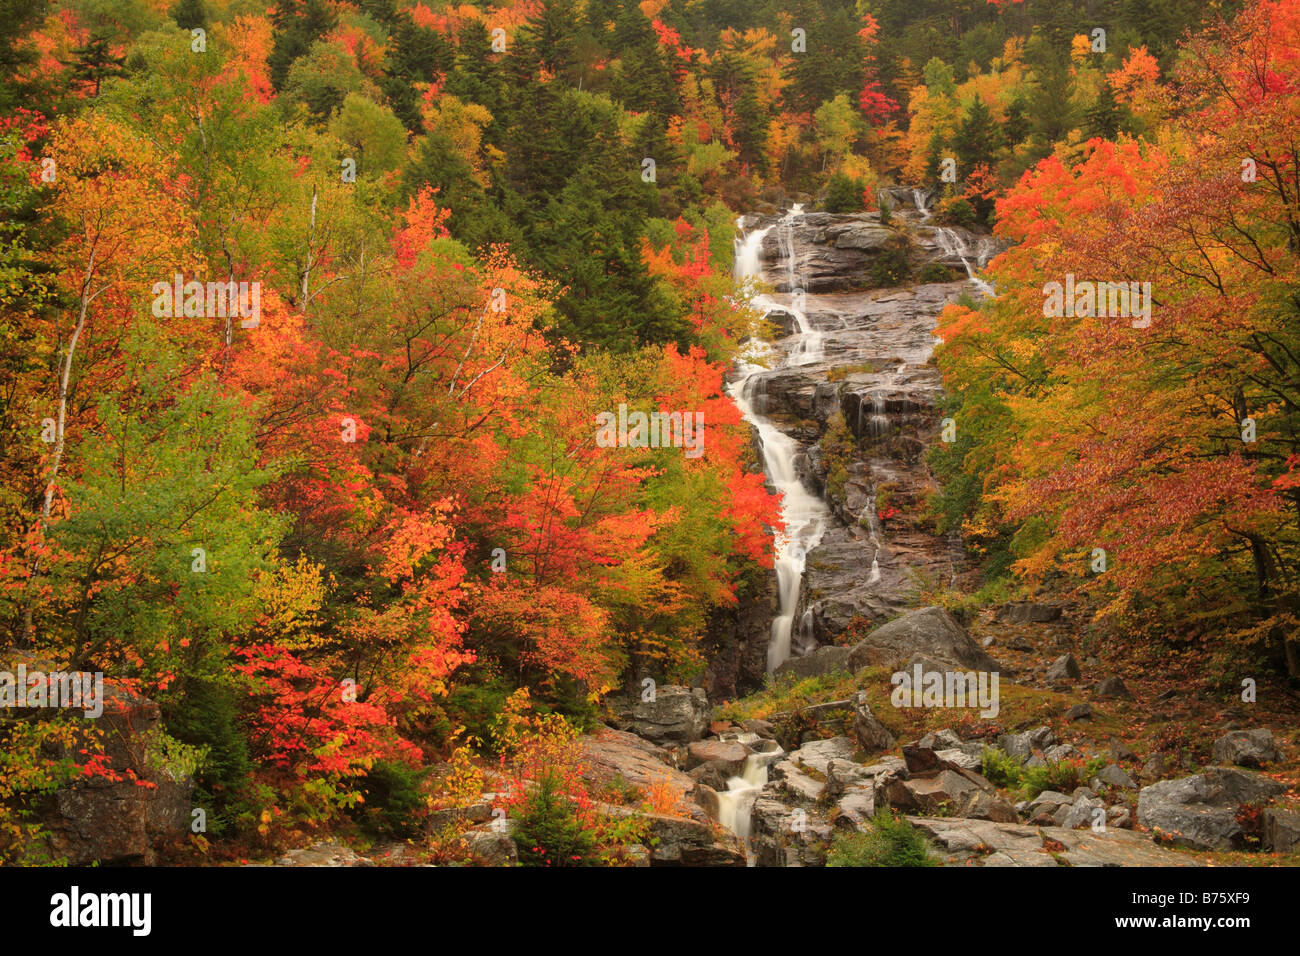 Cascade d'argent, Crawford Notch, North Conway, White Mountains, New Hampshire, USA Banque D'Images